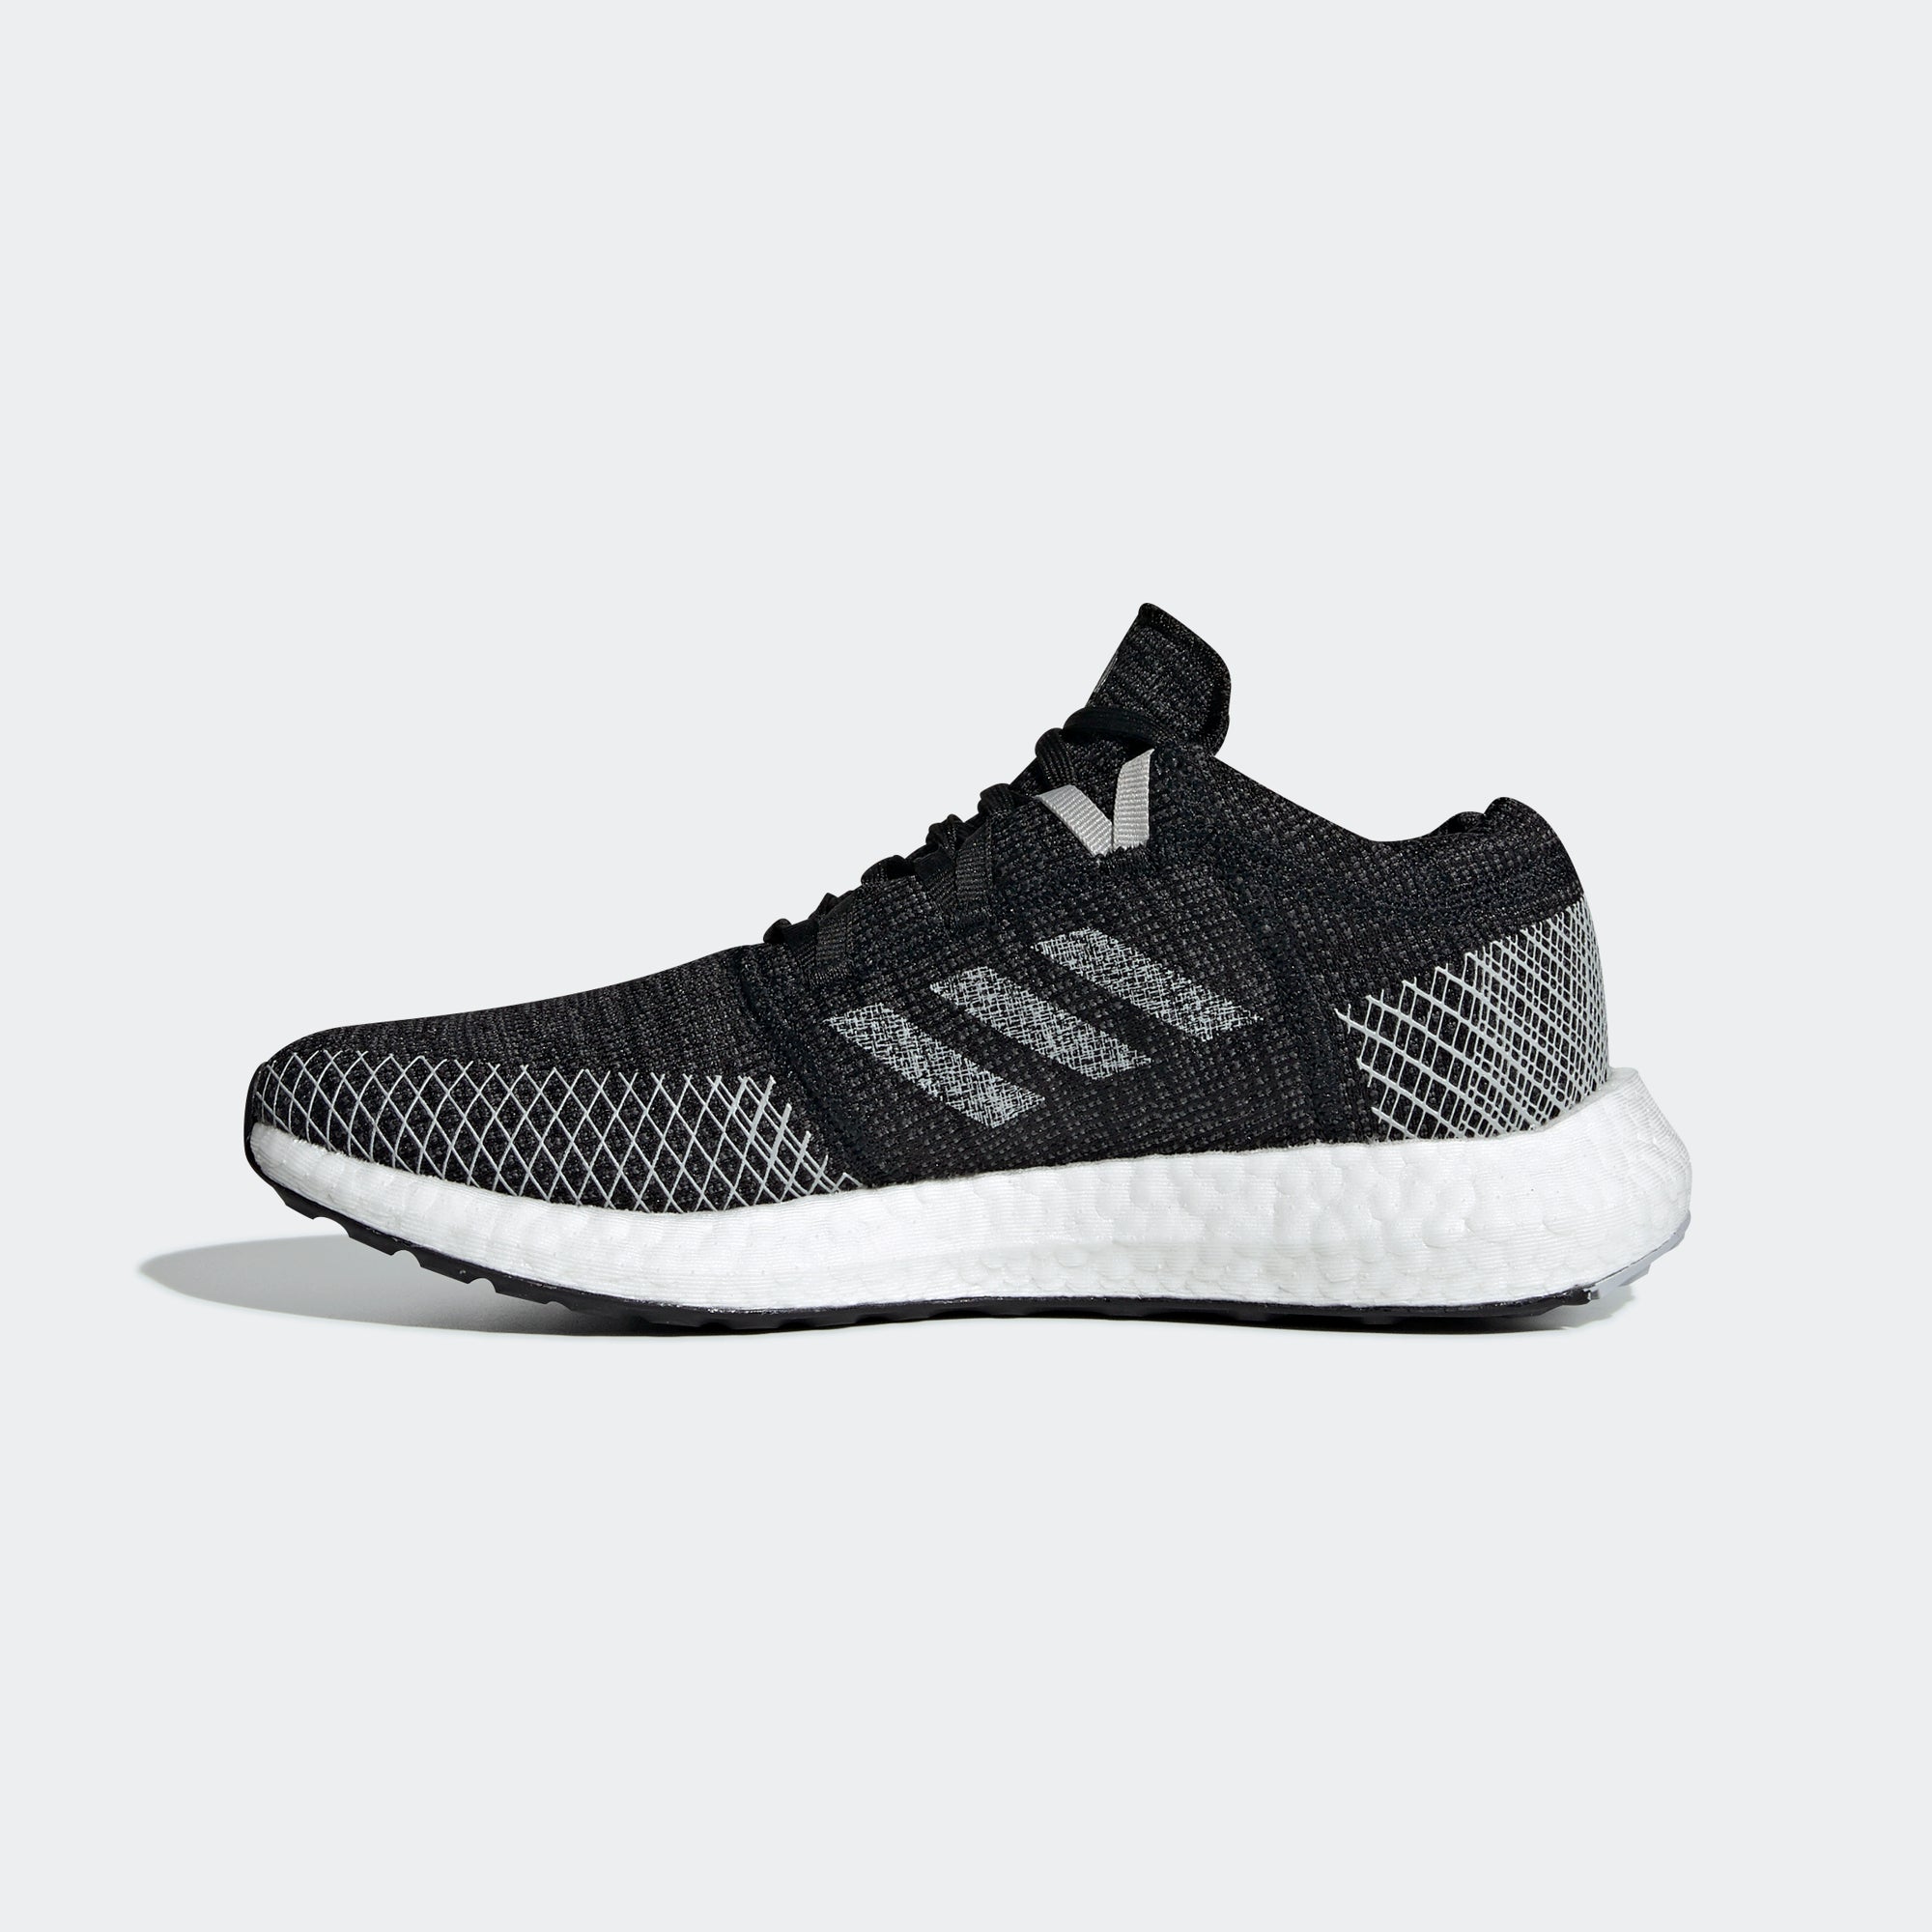 pureboost go shoes womens